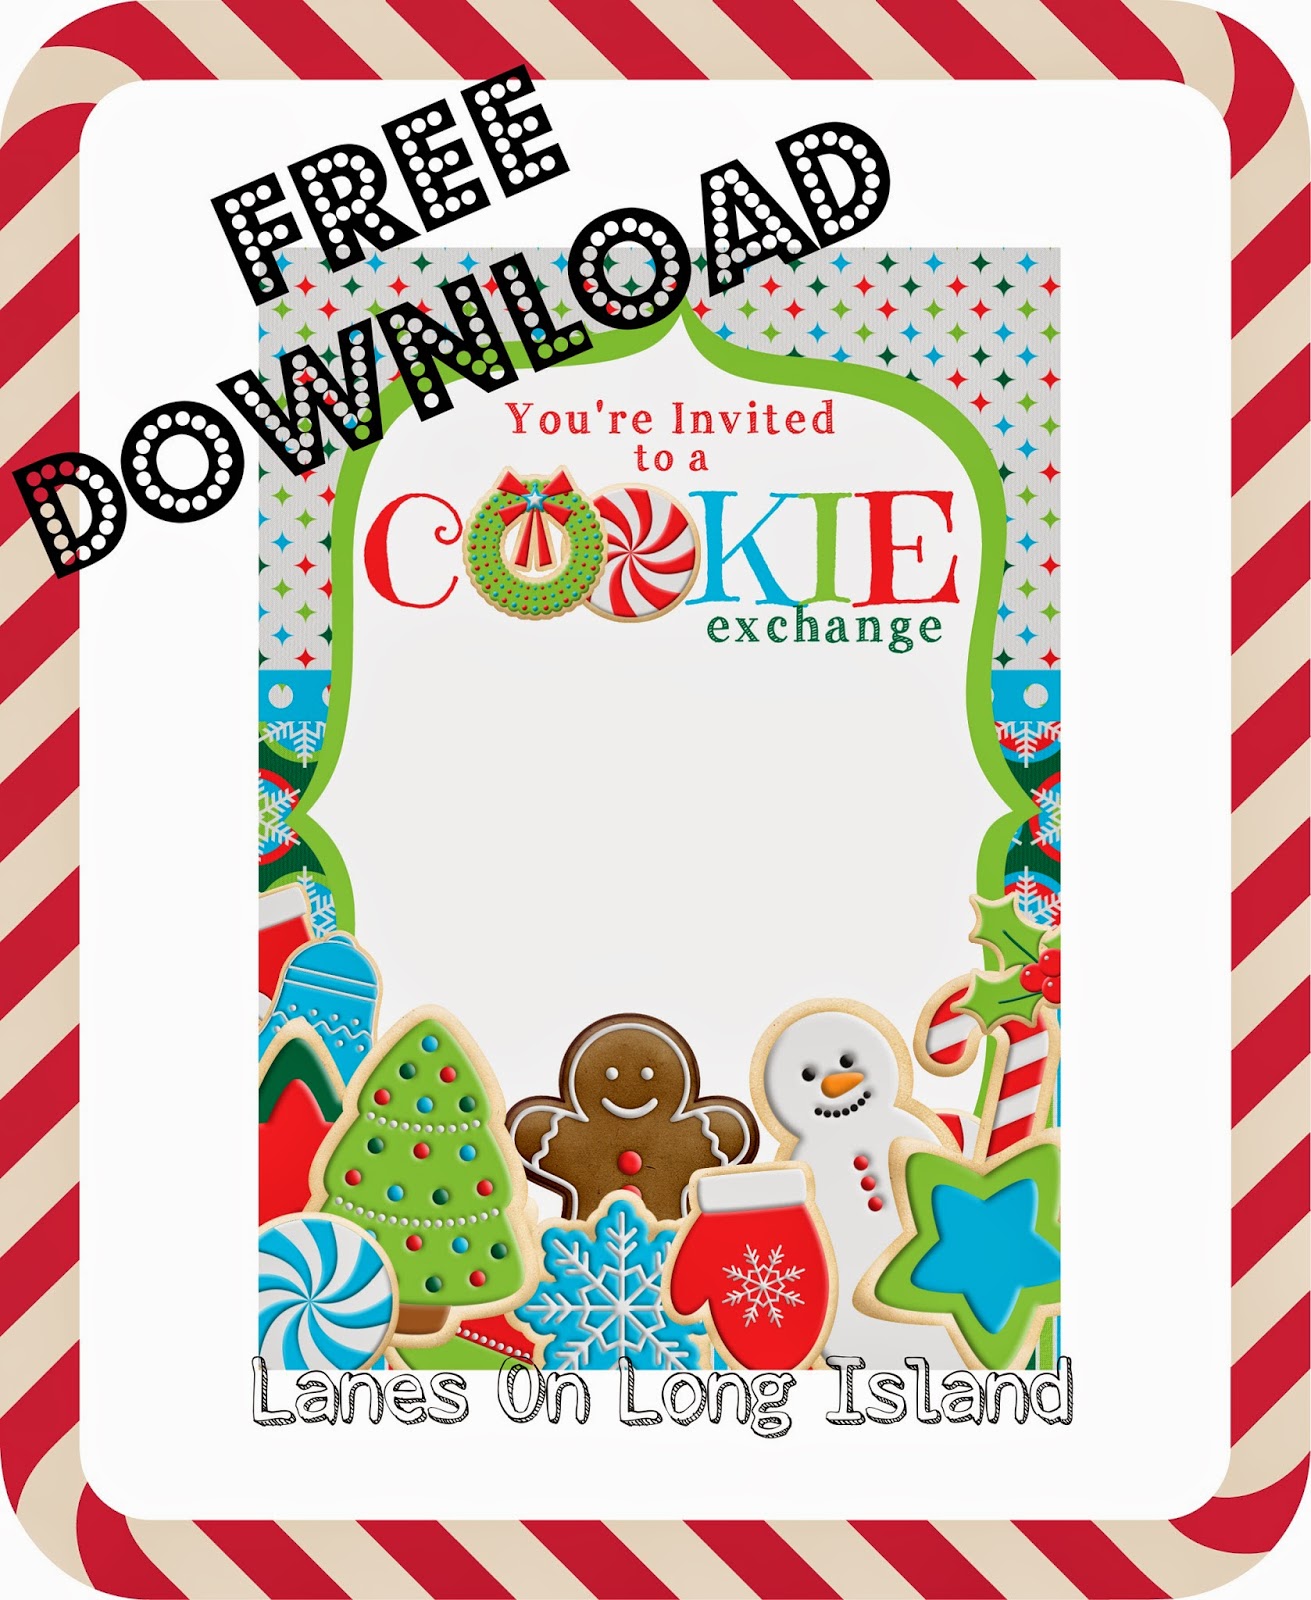 Lanes On Long Island Cookie Exchange Invitations Free Download 